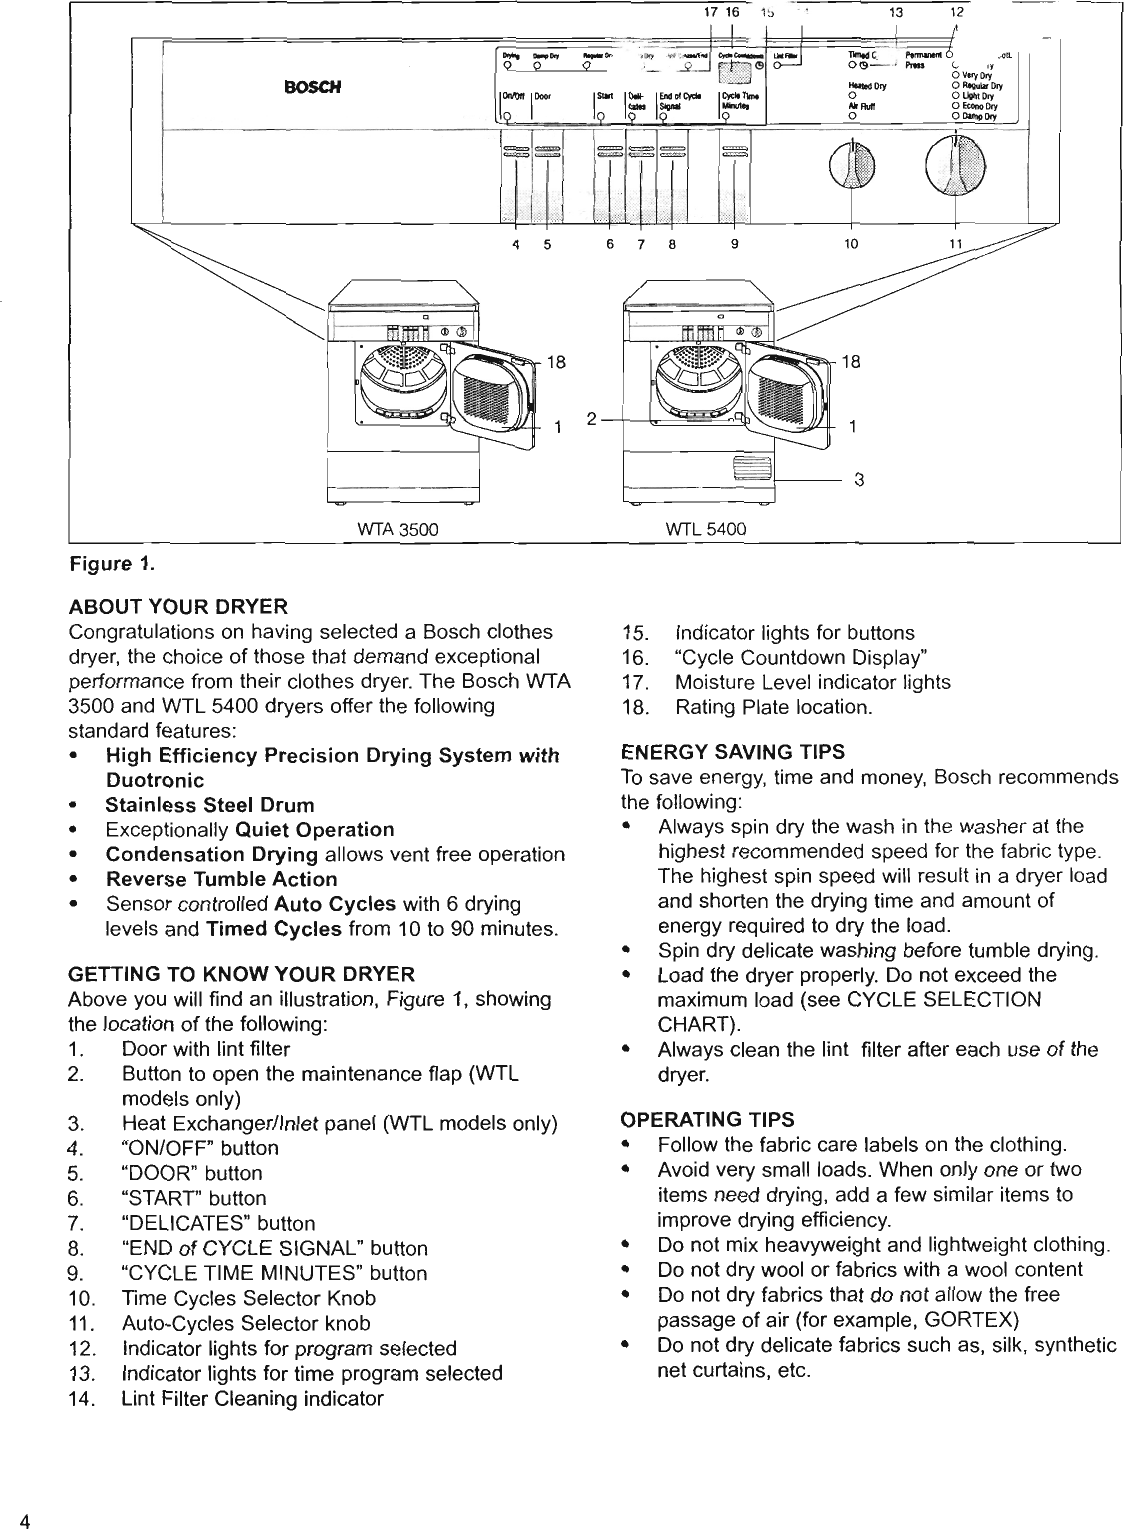 Page 4 of 12 - Boschhome Boschhome-Bosch-Appliances-Clothes-Dryer-Wta-3500-Users-Manual- Use & Care Manual For Bosch WTA 3500 And WTL 5400 Dryers  Boschhome-bosch-appliances-clothes-dryer-wta-3500-users-manual